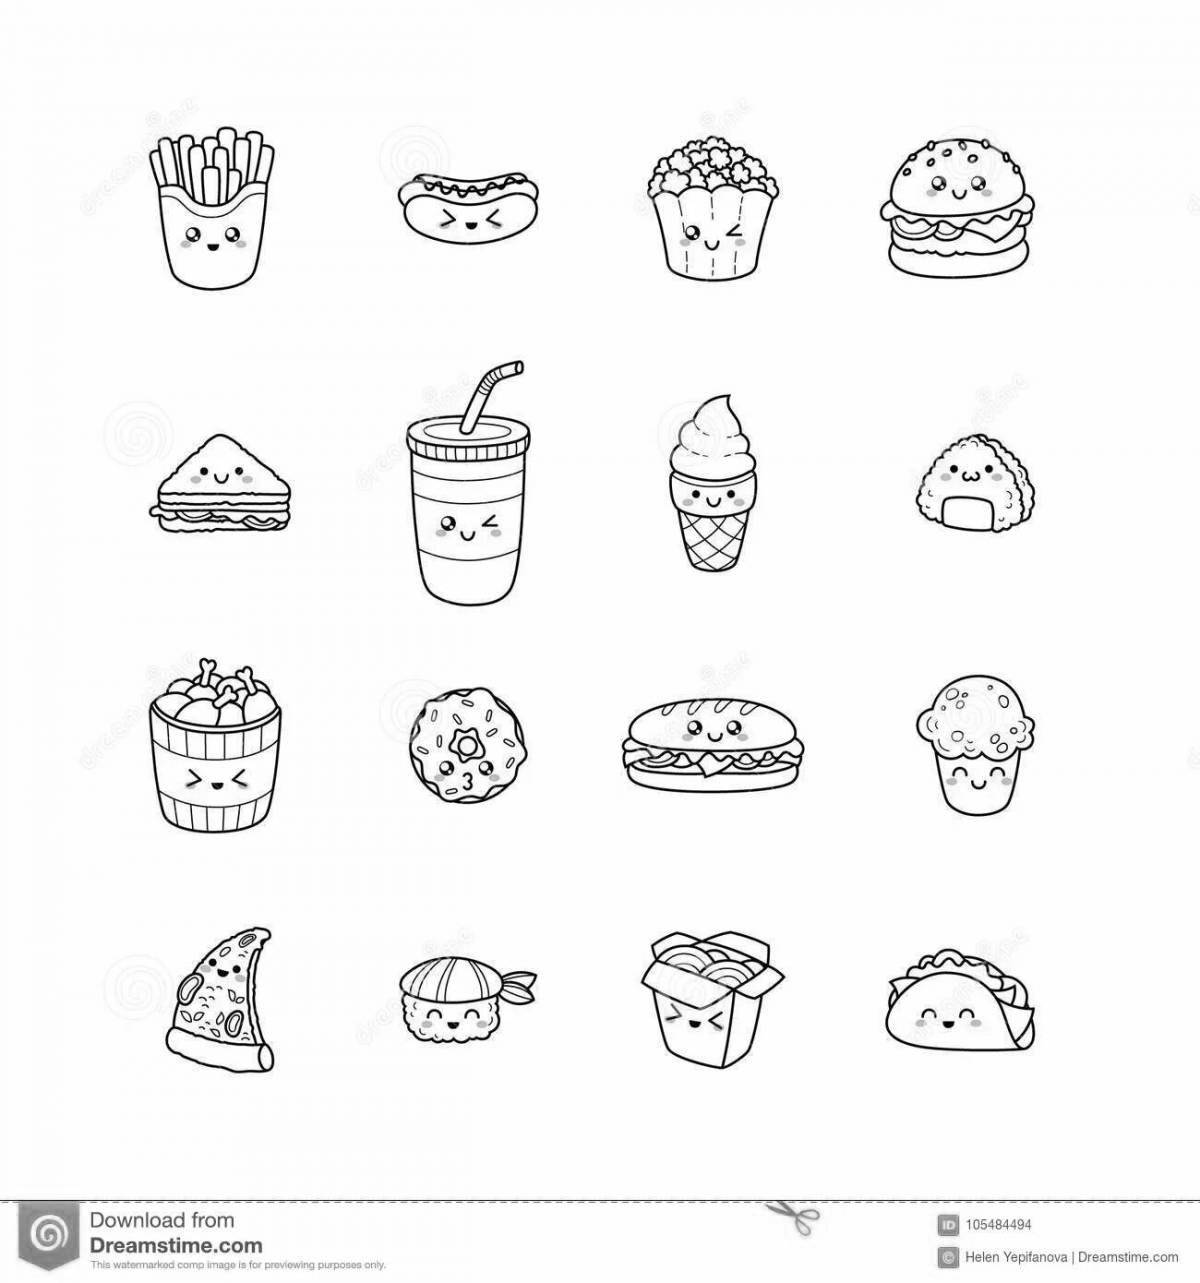 Adorable food stickers coloring book